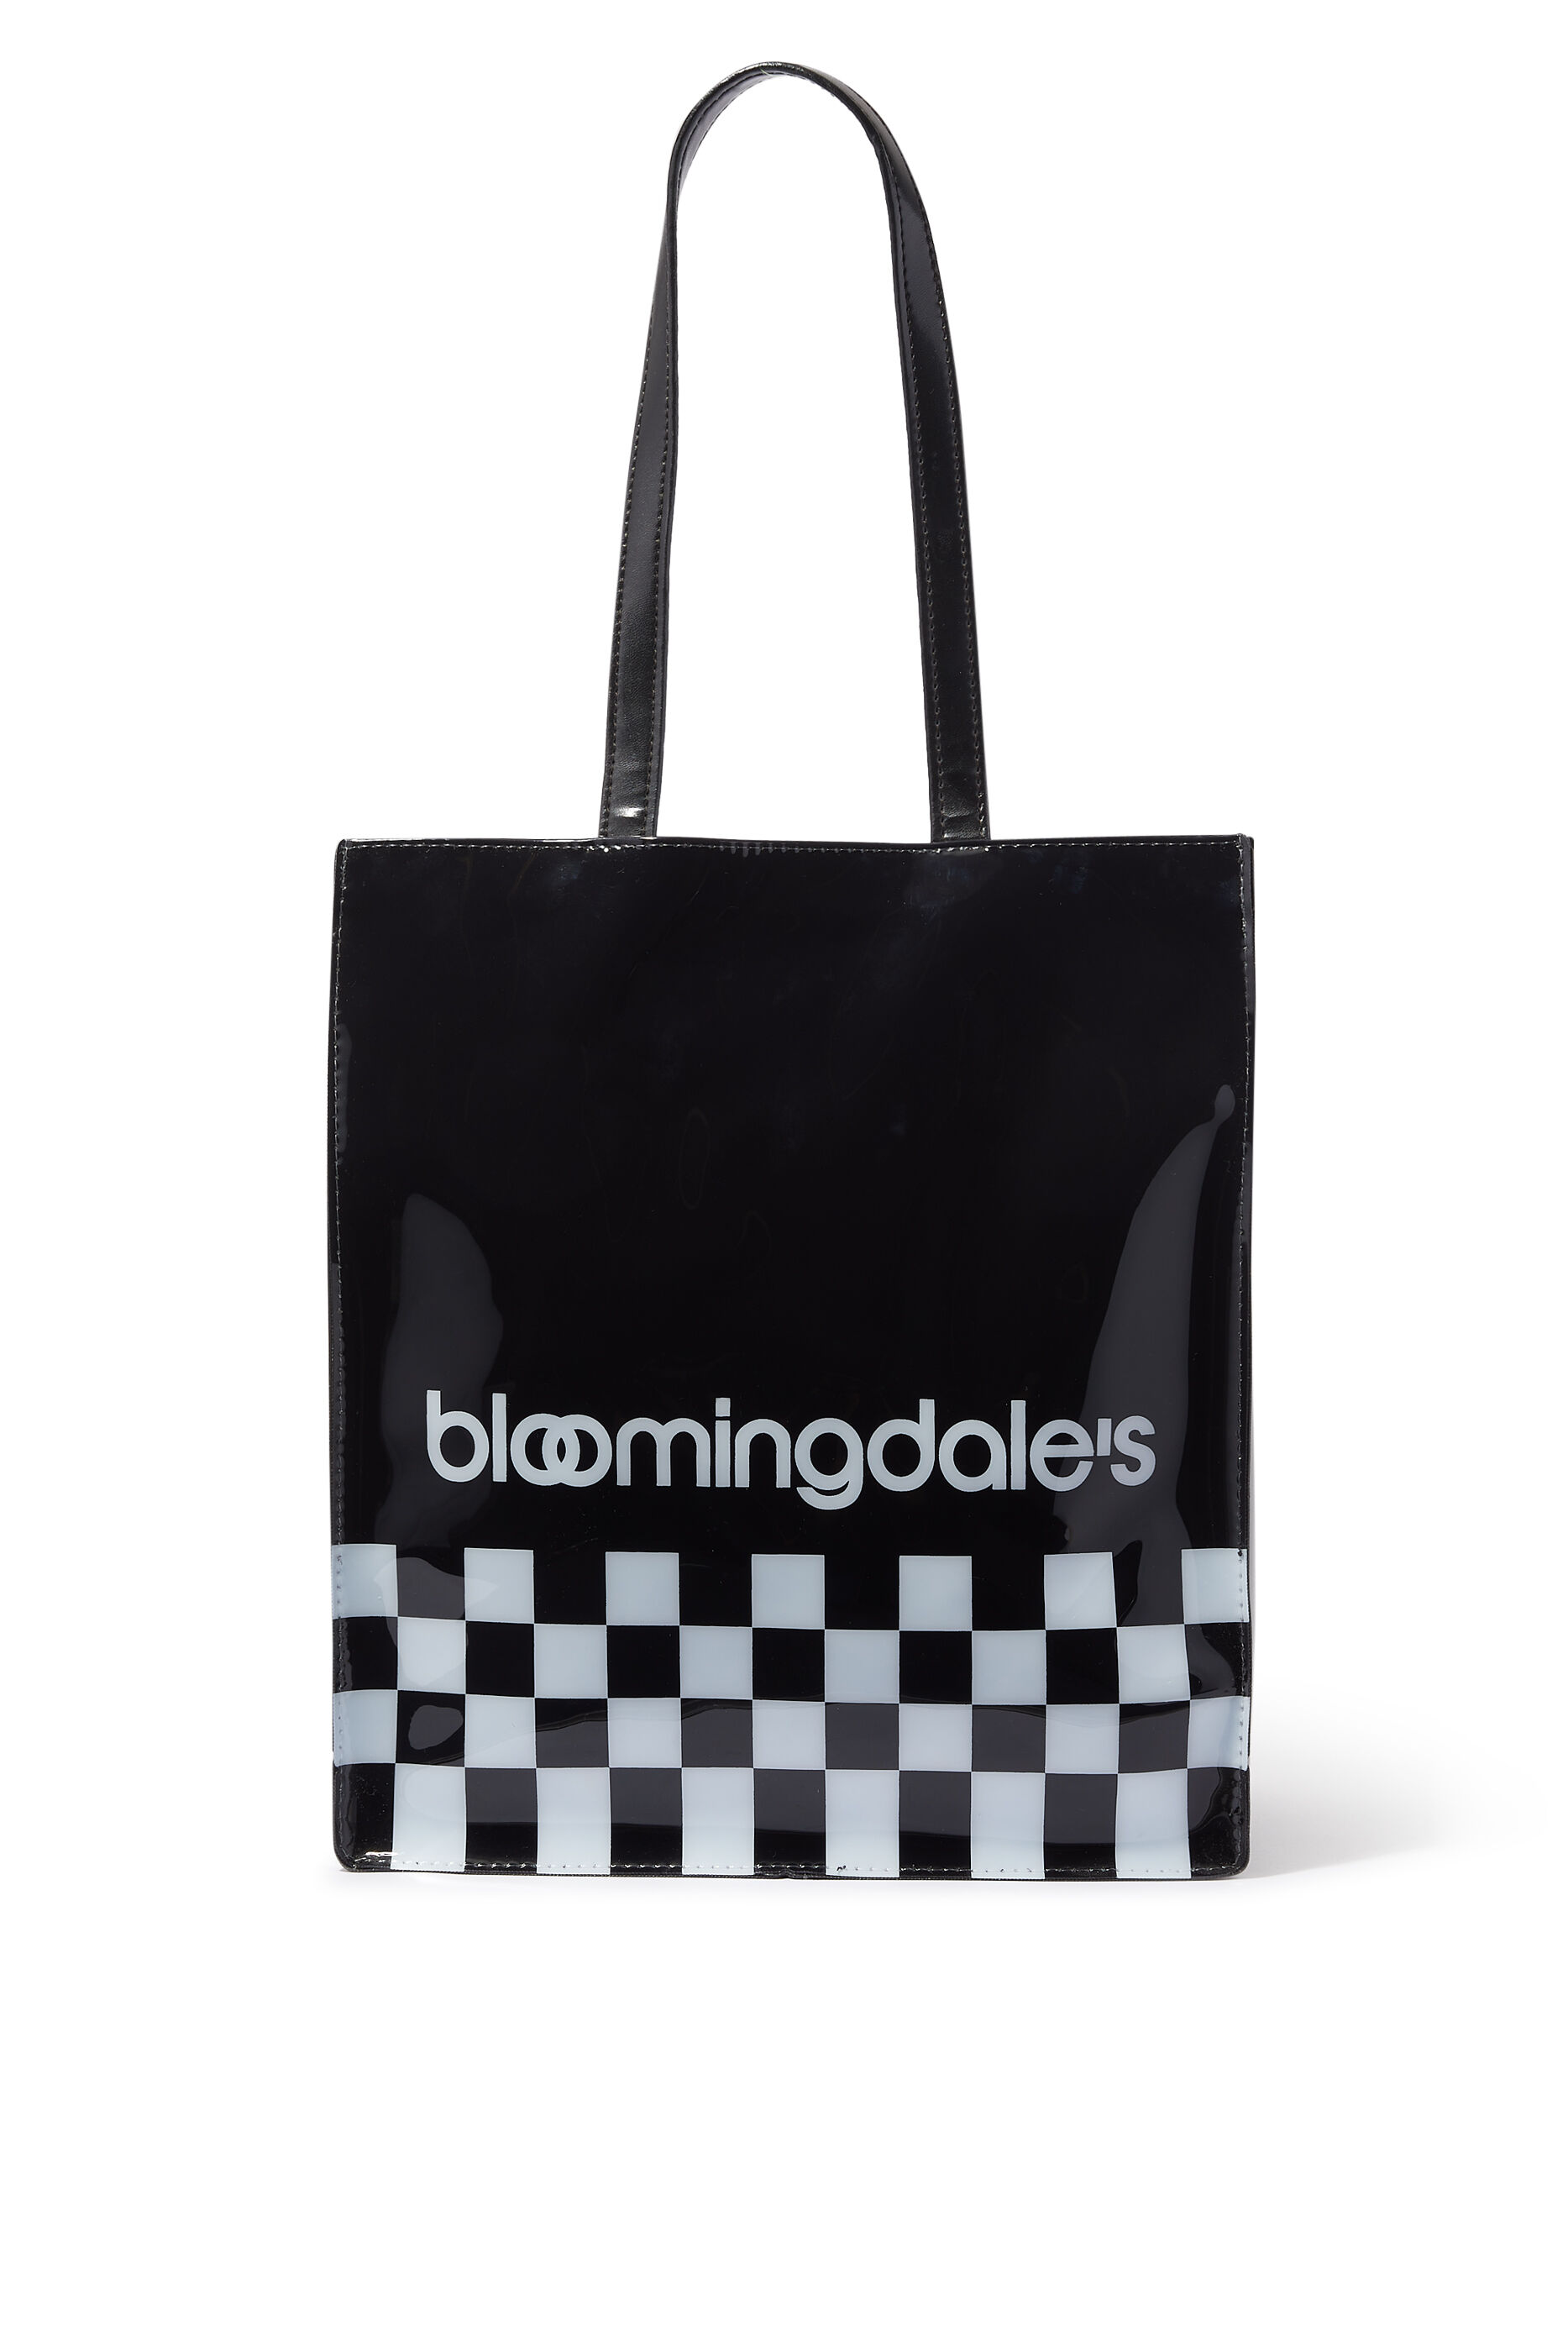 The Bloomingdale's Big Brown Bag Turns 50 - The New York Times